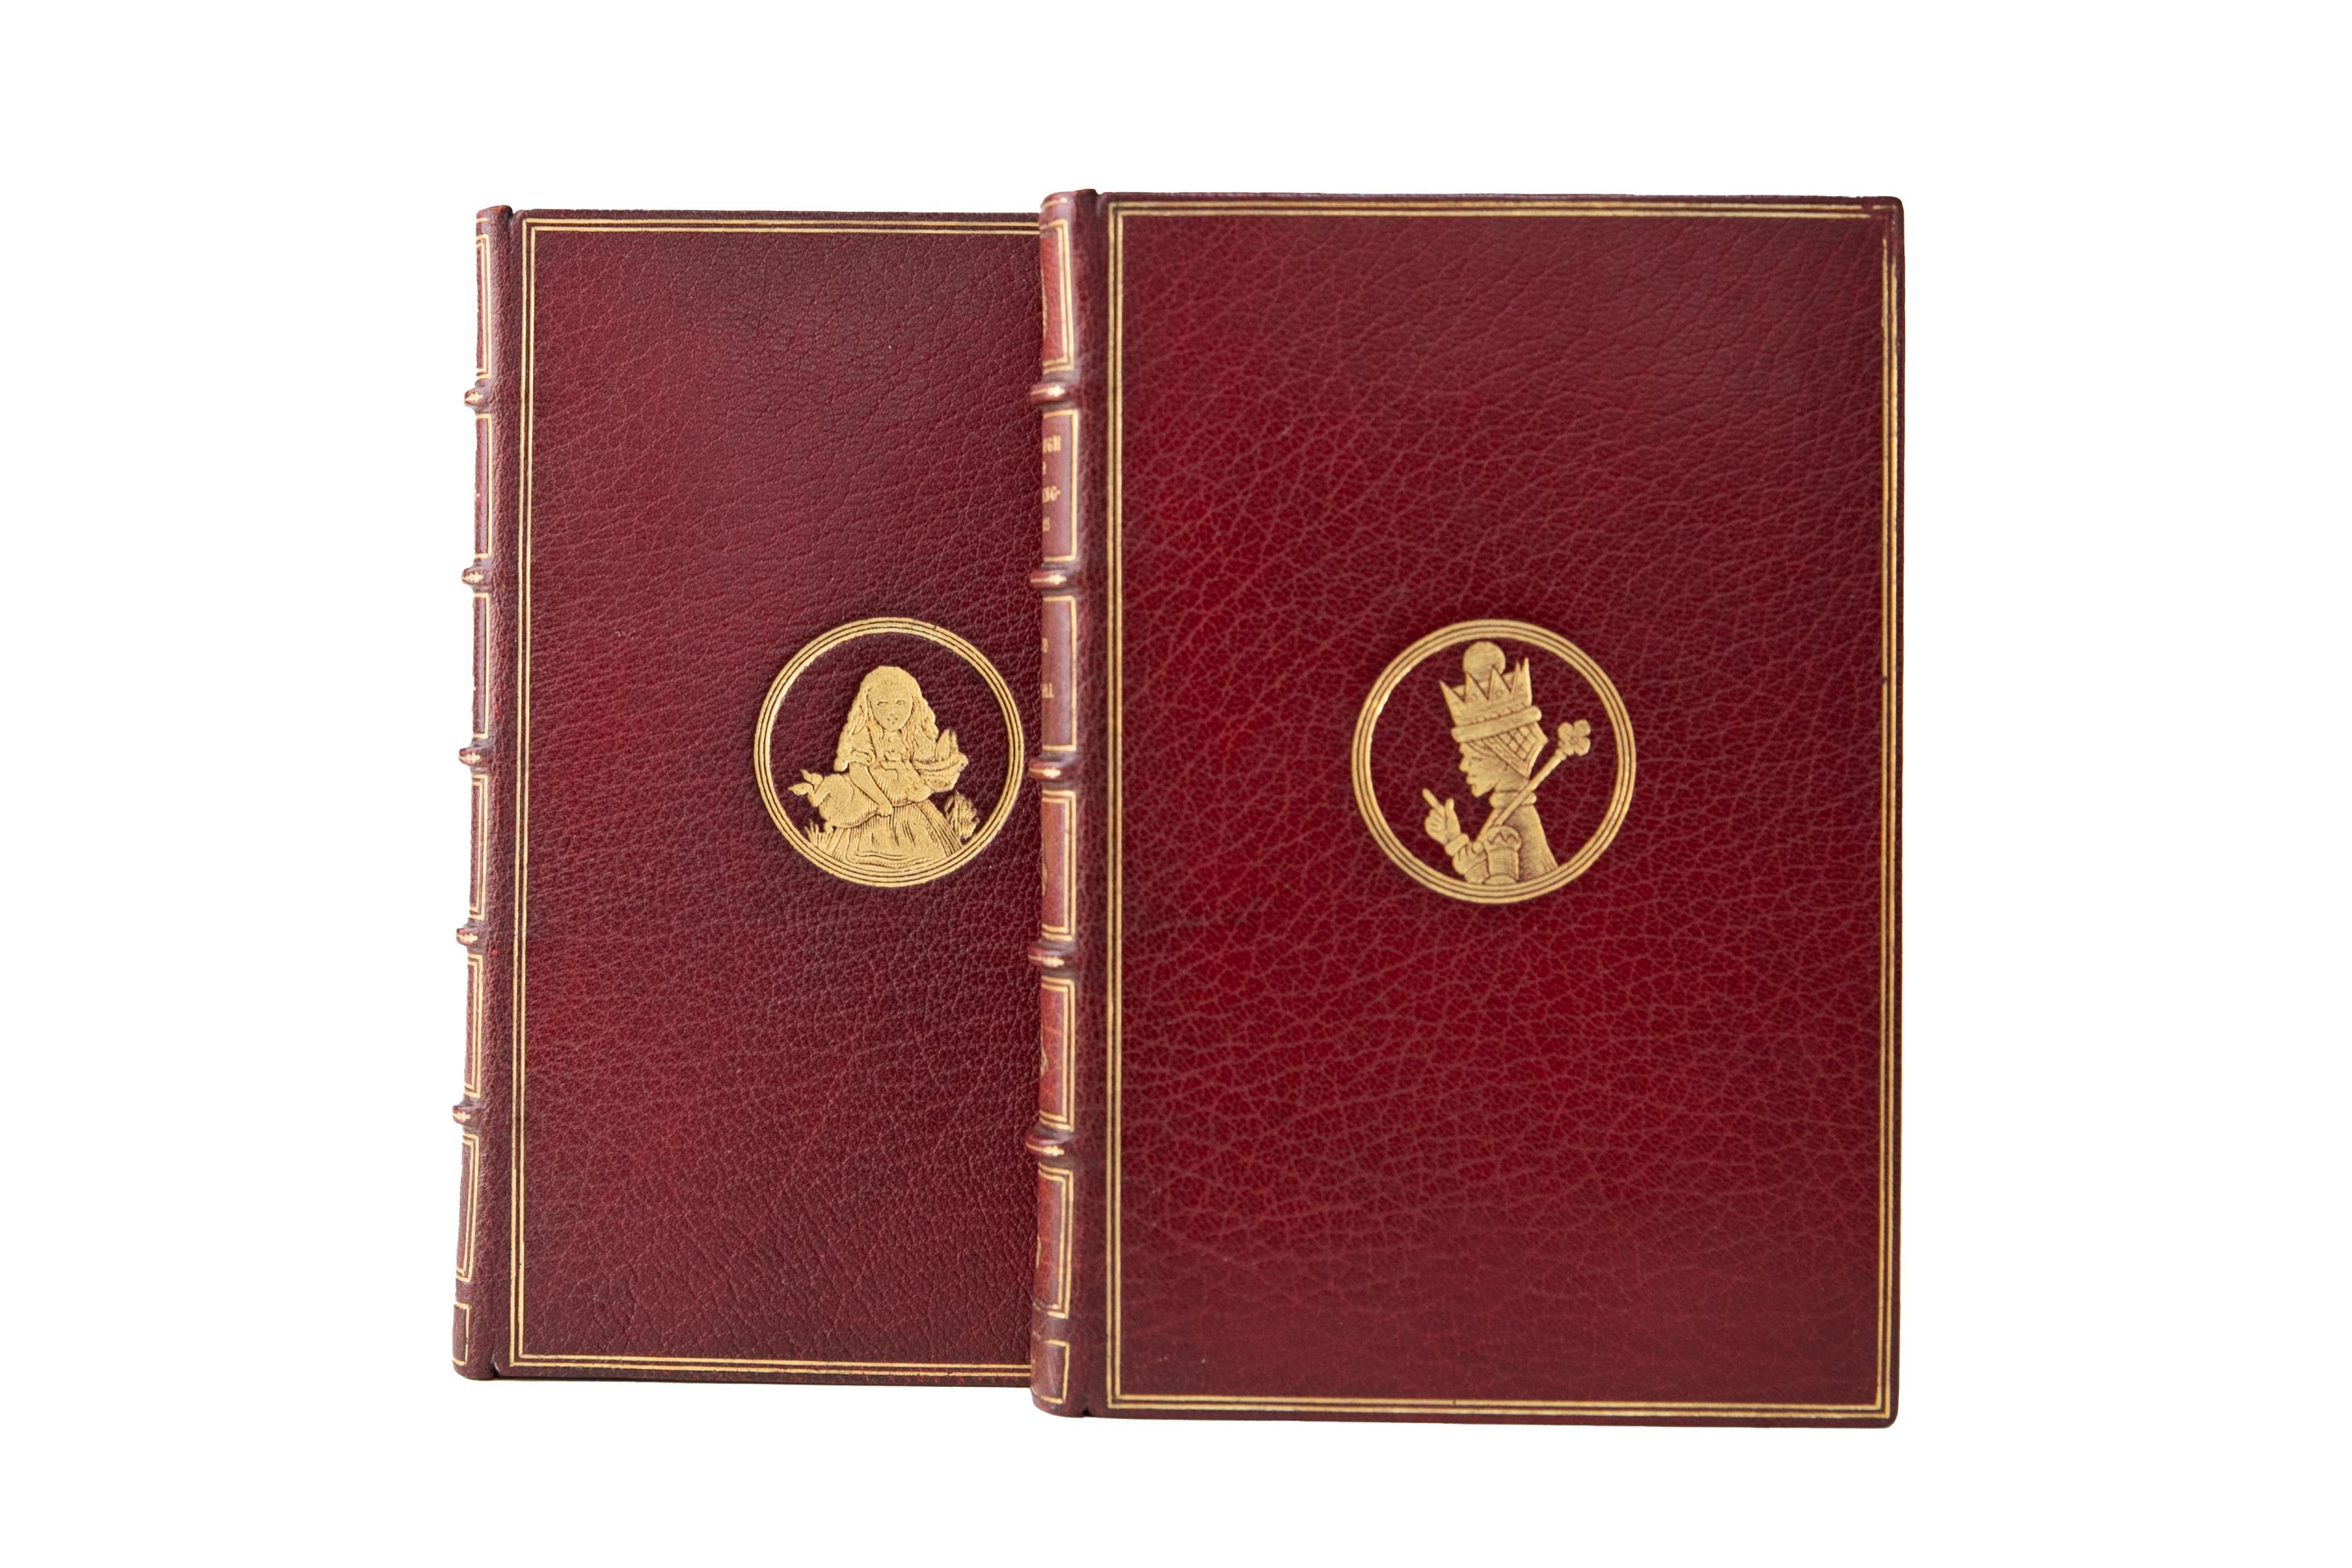 2 Volumes. Lewis Carroll, Alice's Adventures in Wonderland & Through the Looking Glass. Bound by Sangorski & Sutcliffe in full red morocco with the covers and raised band spines gilt-tooled. All edges gilt with gilt-tooled dentelles and marbled